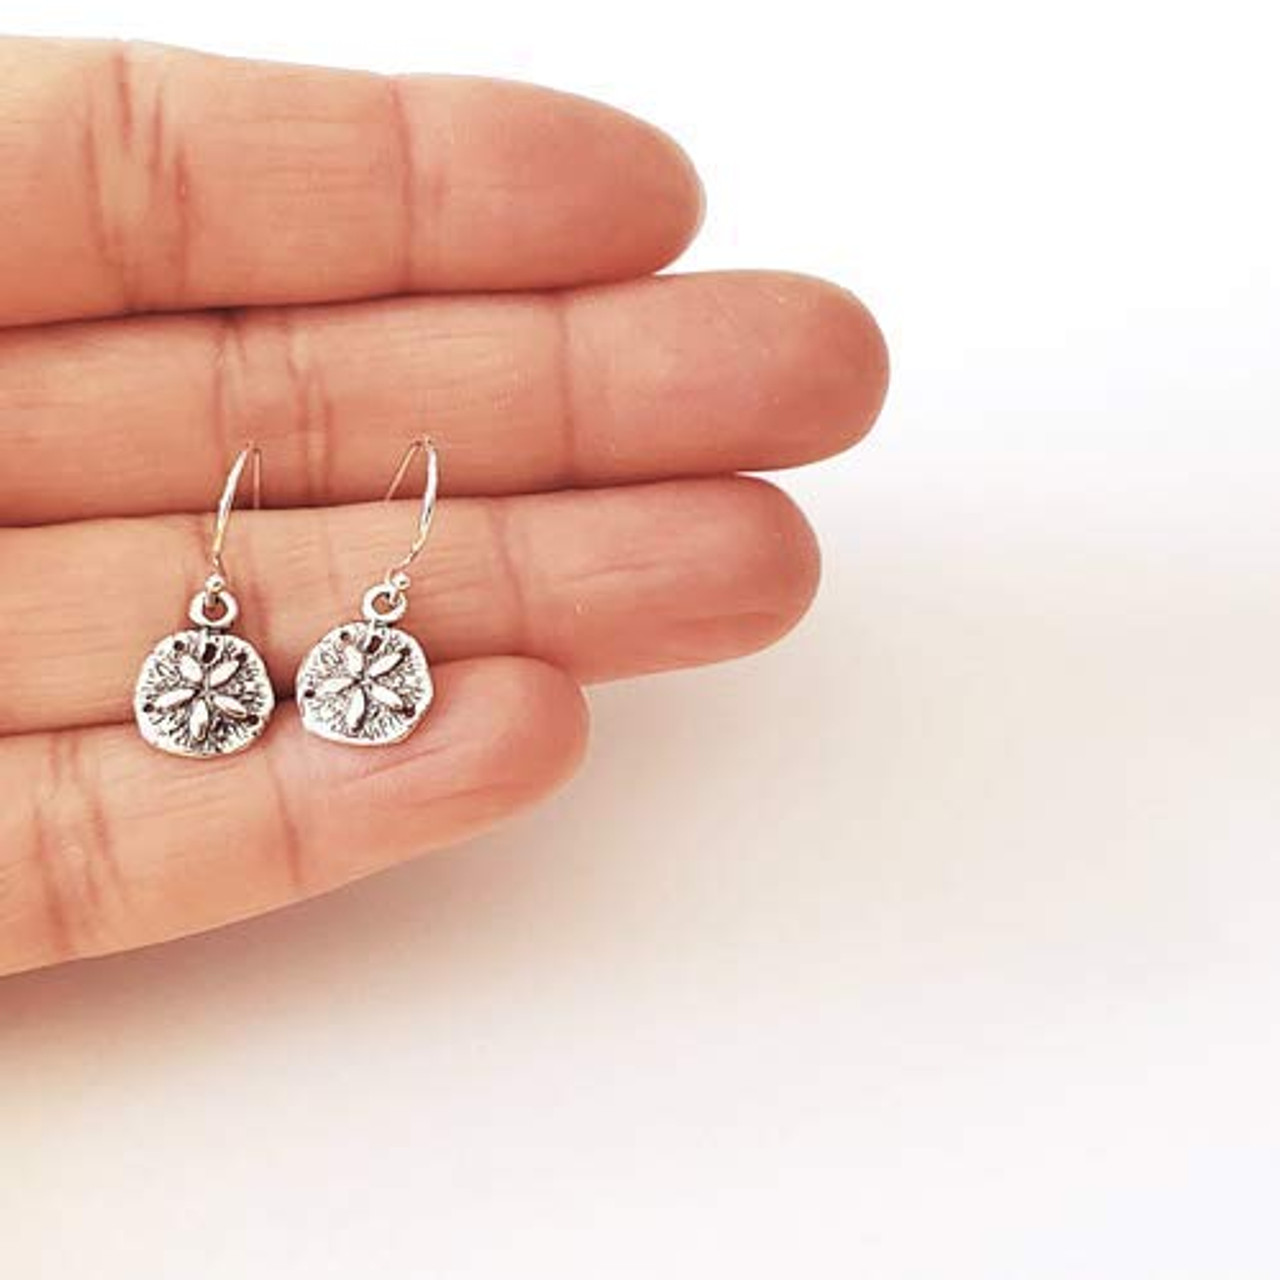 Sand Dollar Charm Sterling Silver Earrings tiny size - Warehousesoverstock